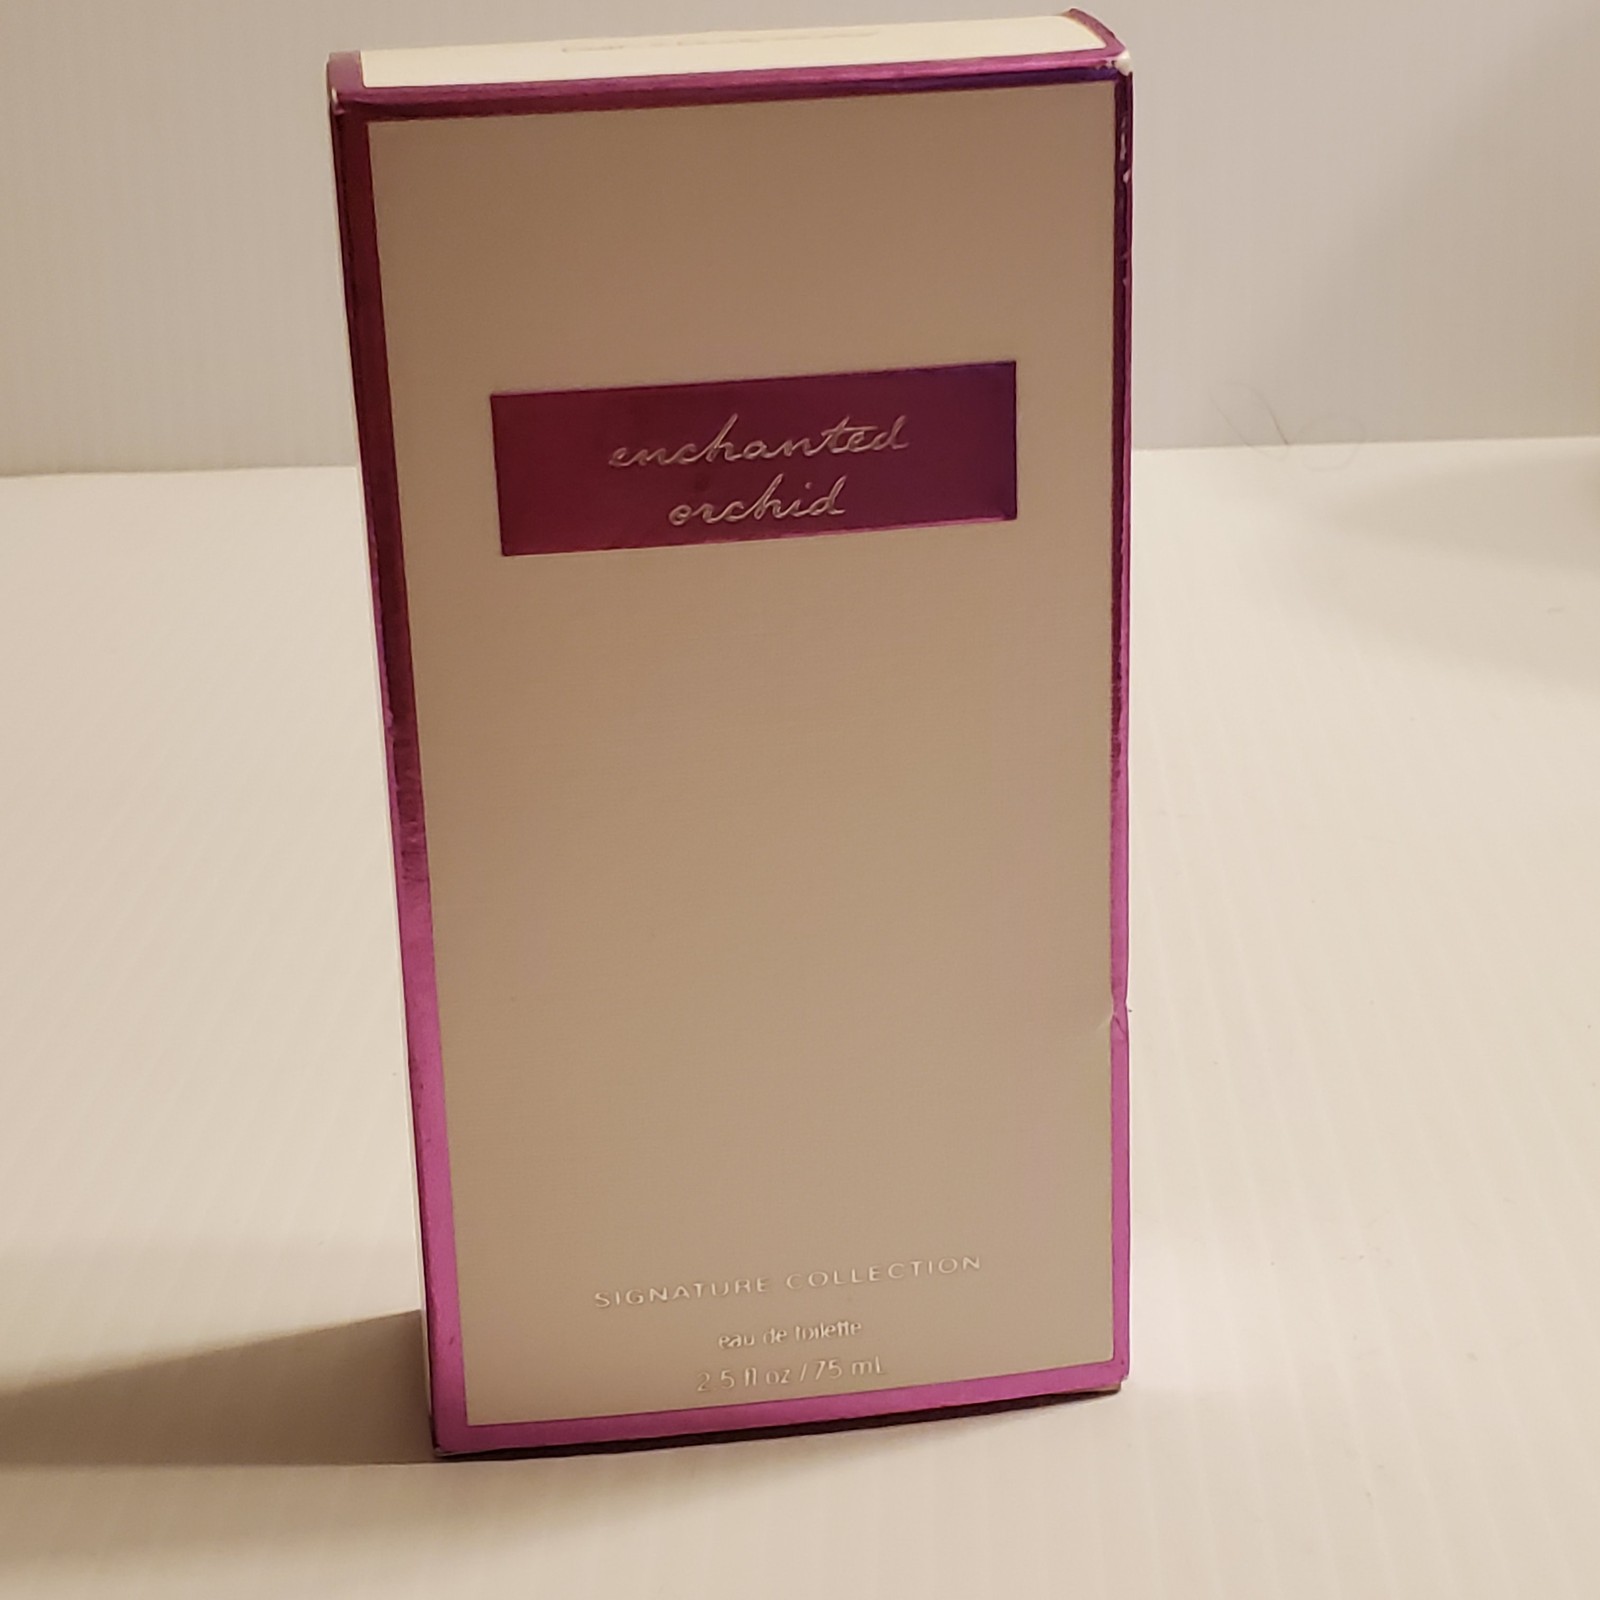 Primary image for Enchanted Orchid Perfume by Bath & Body Works Eau De Toilette Spray 2.5oz New